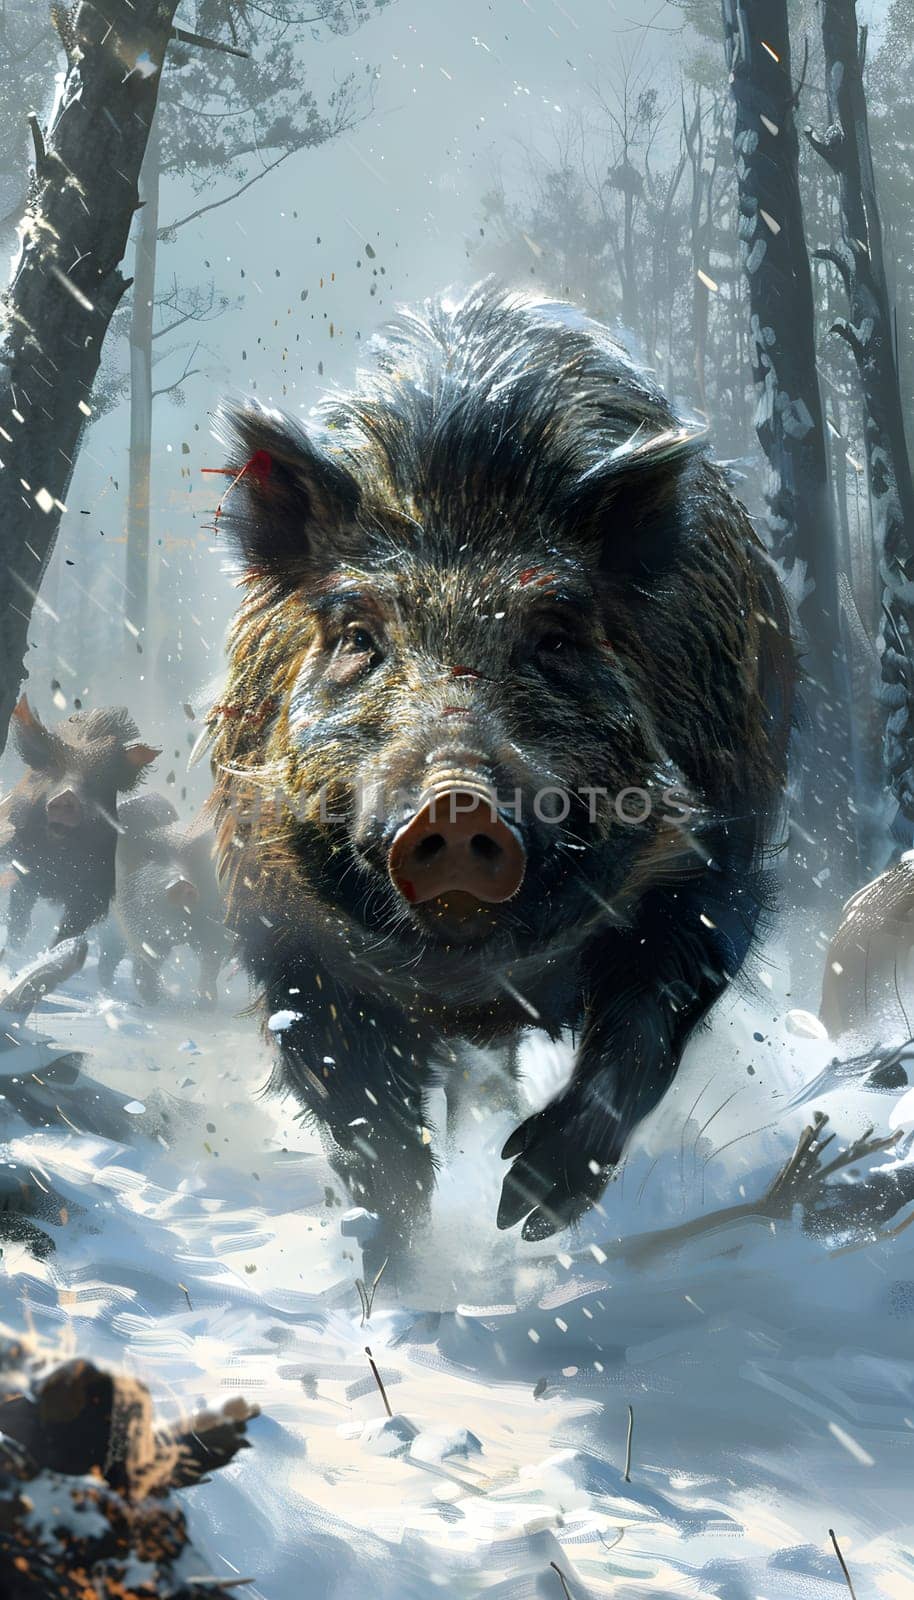 A carnivorous wild boar with a fluid running through the snowy woods by Nadtochiy